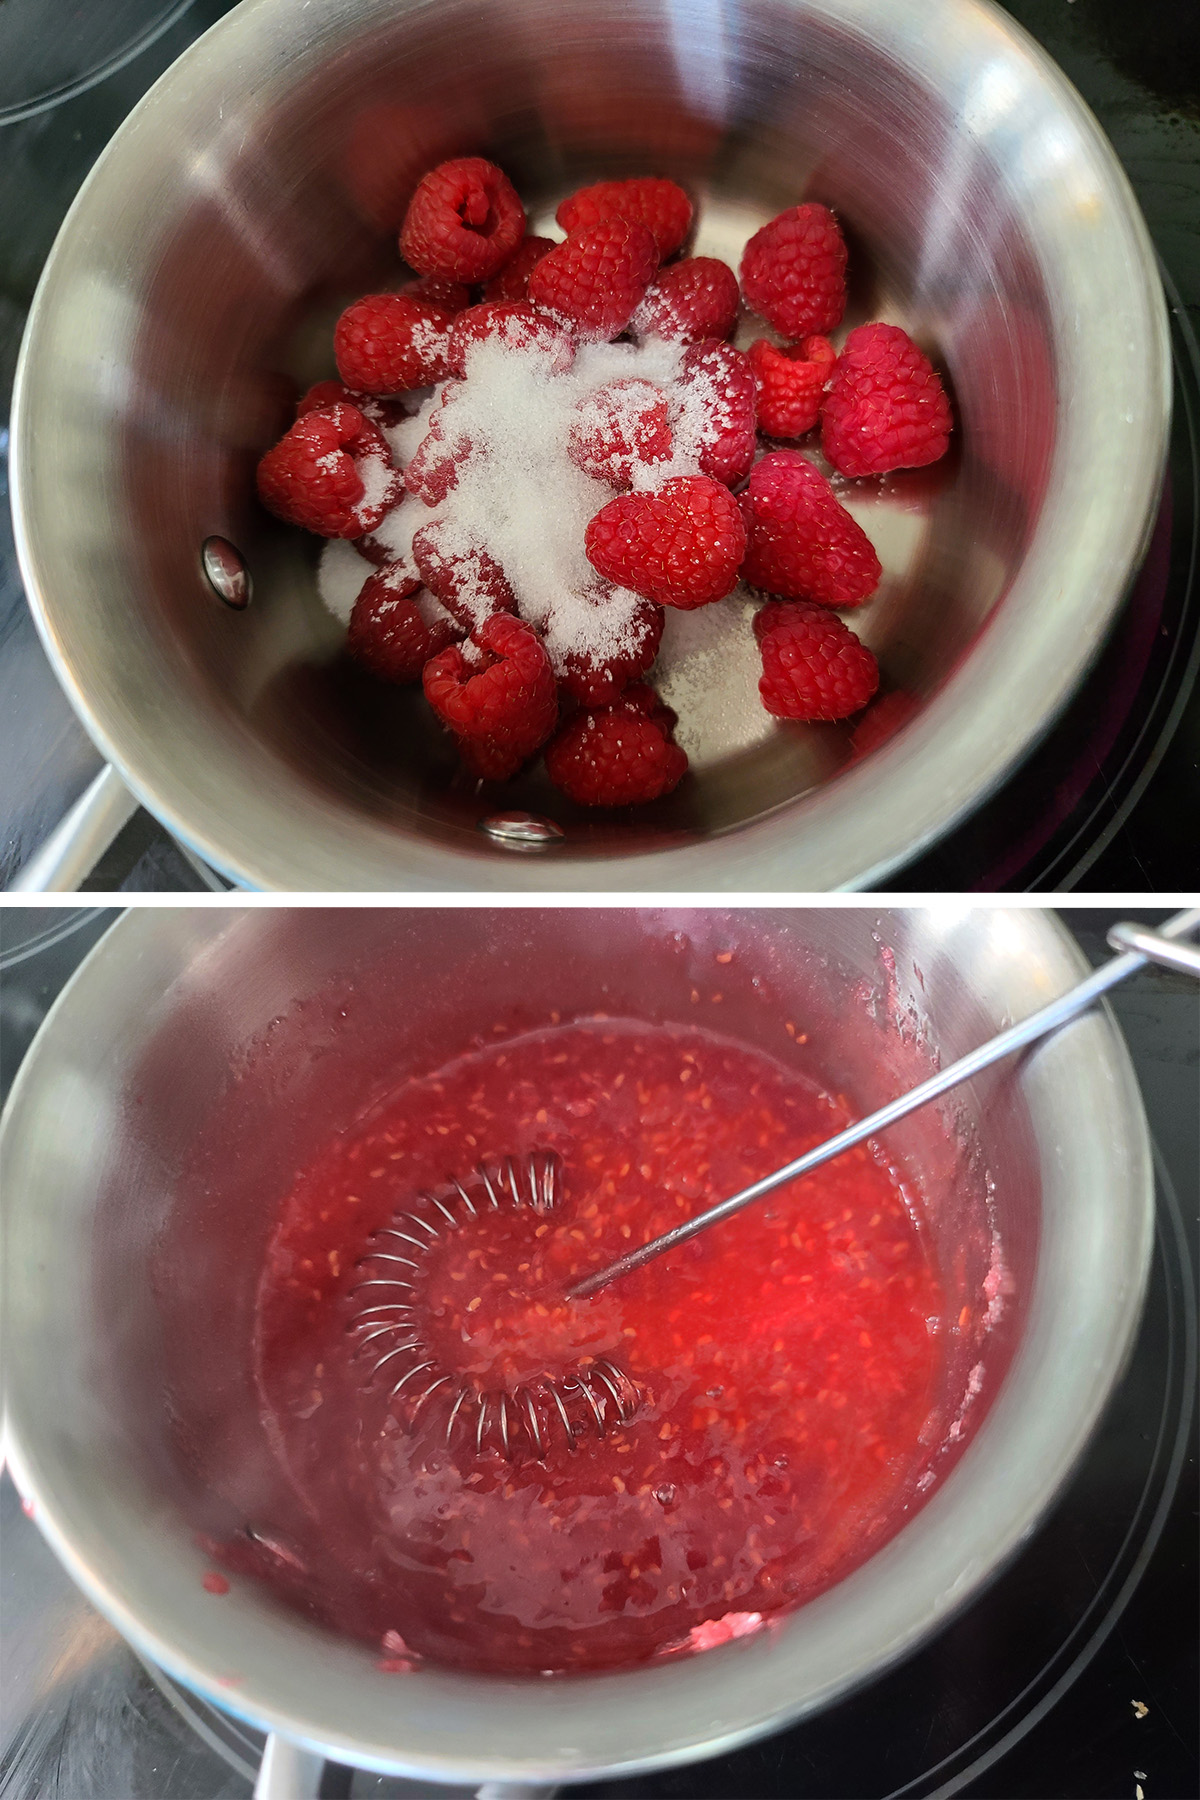 A 2 part image showing a quick sugar free raspberry sauce being made in a small pot.